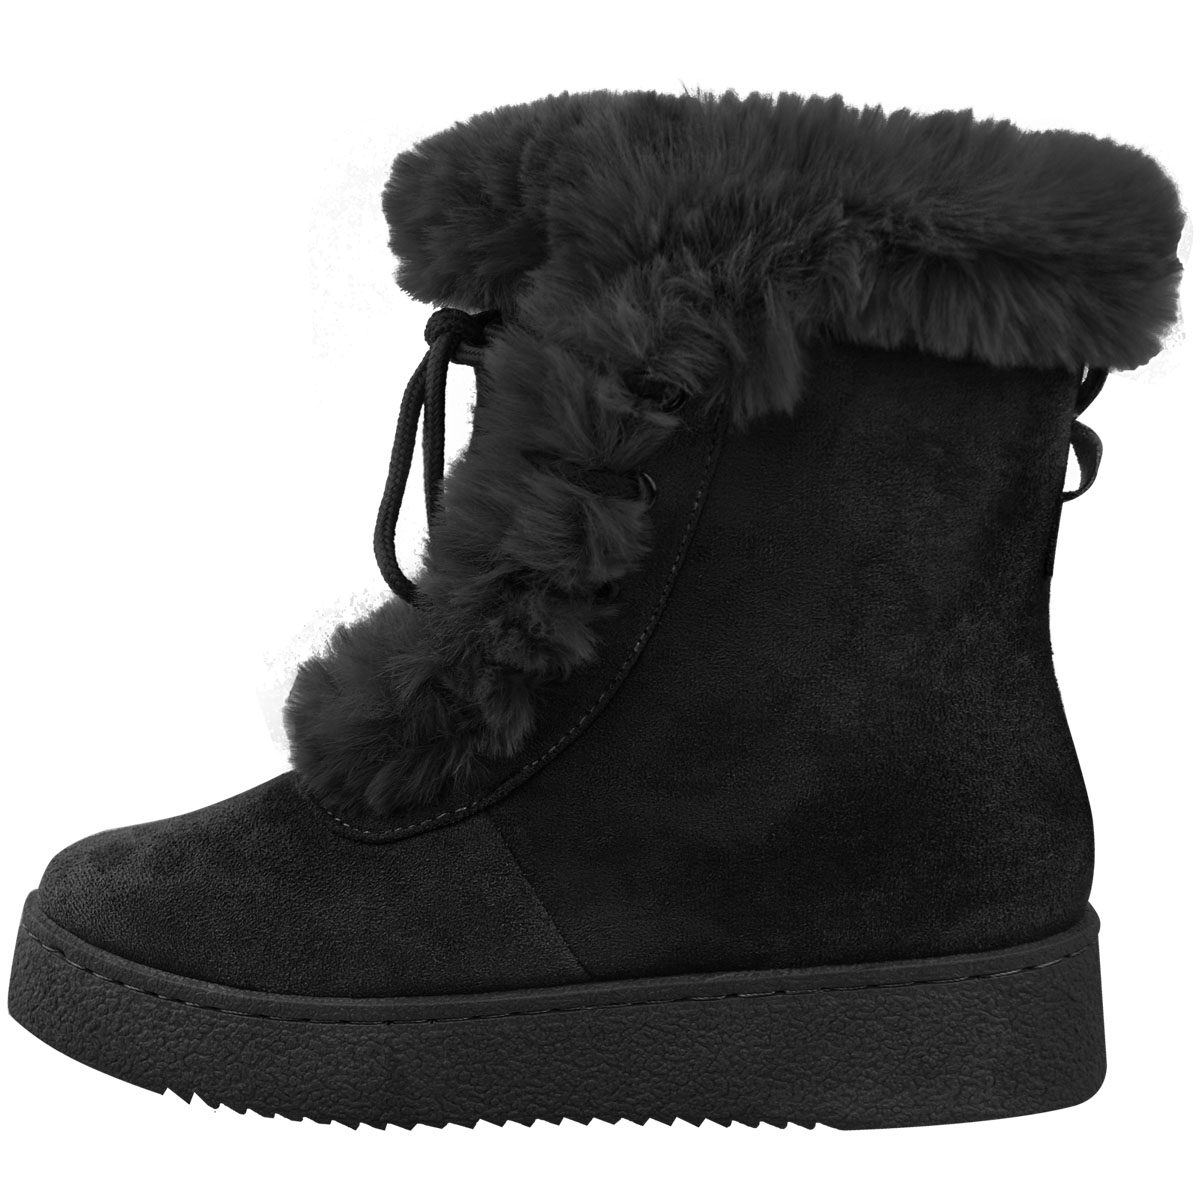 LADIES FLAT ANKLE BOOTS ZIP UP WOMENS FUR LINED WARM BLACK COMFY BIG SIZES 8-11 